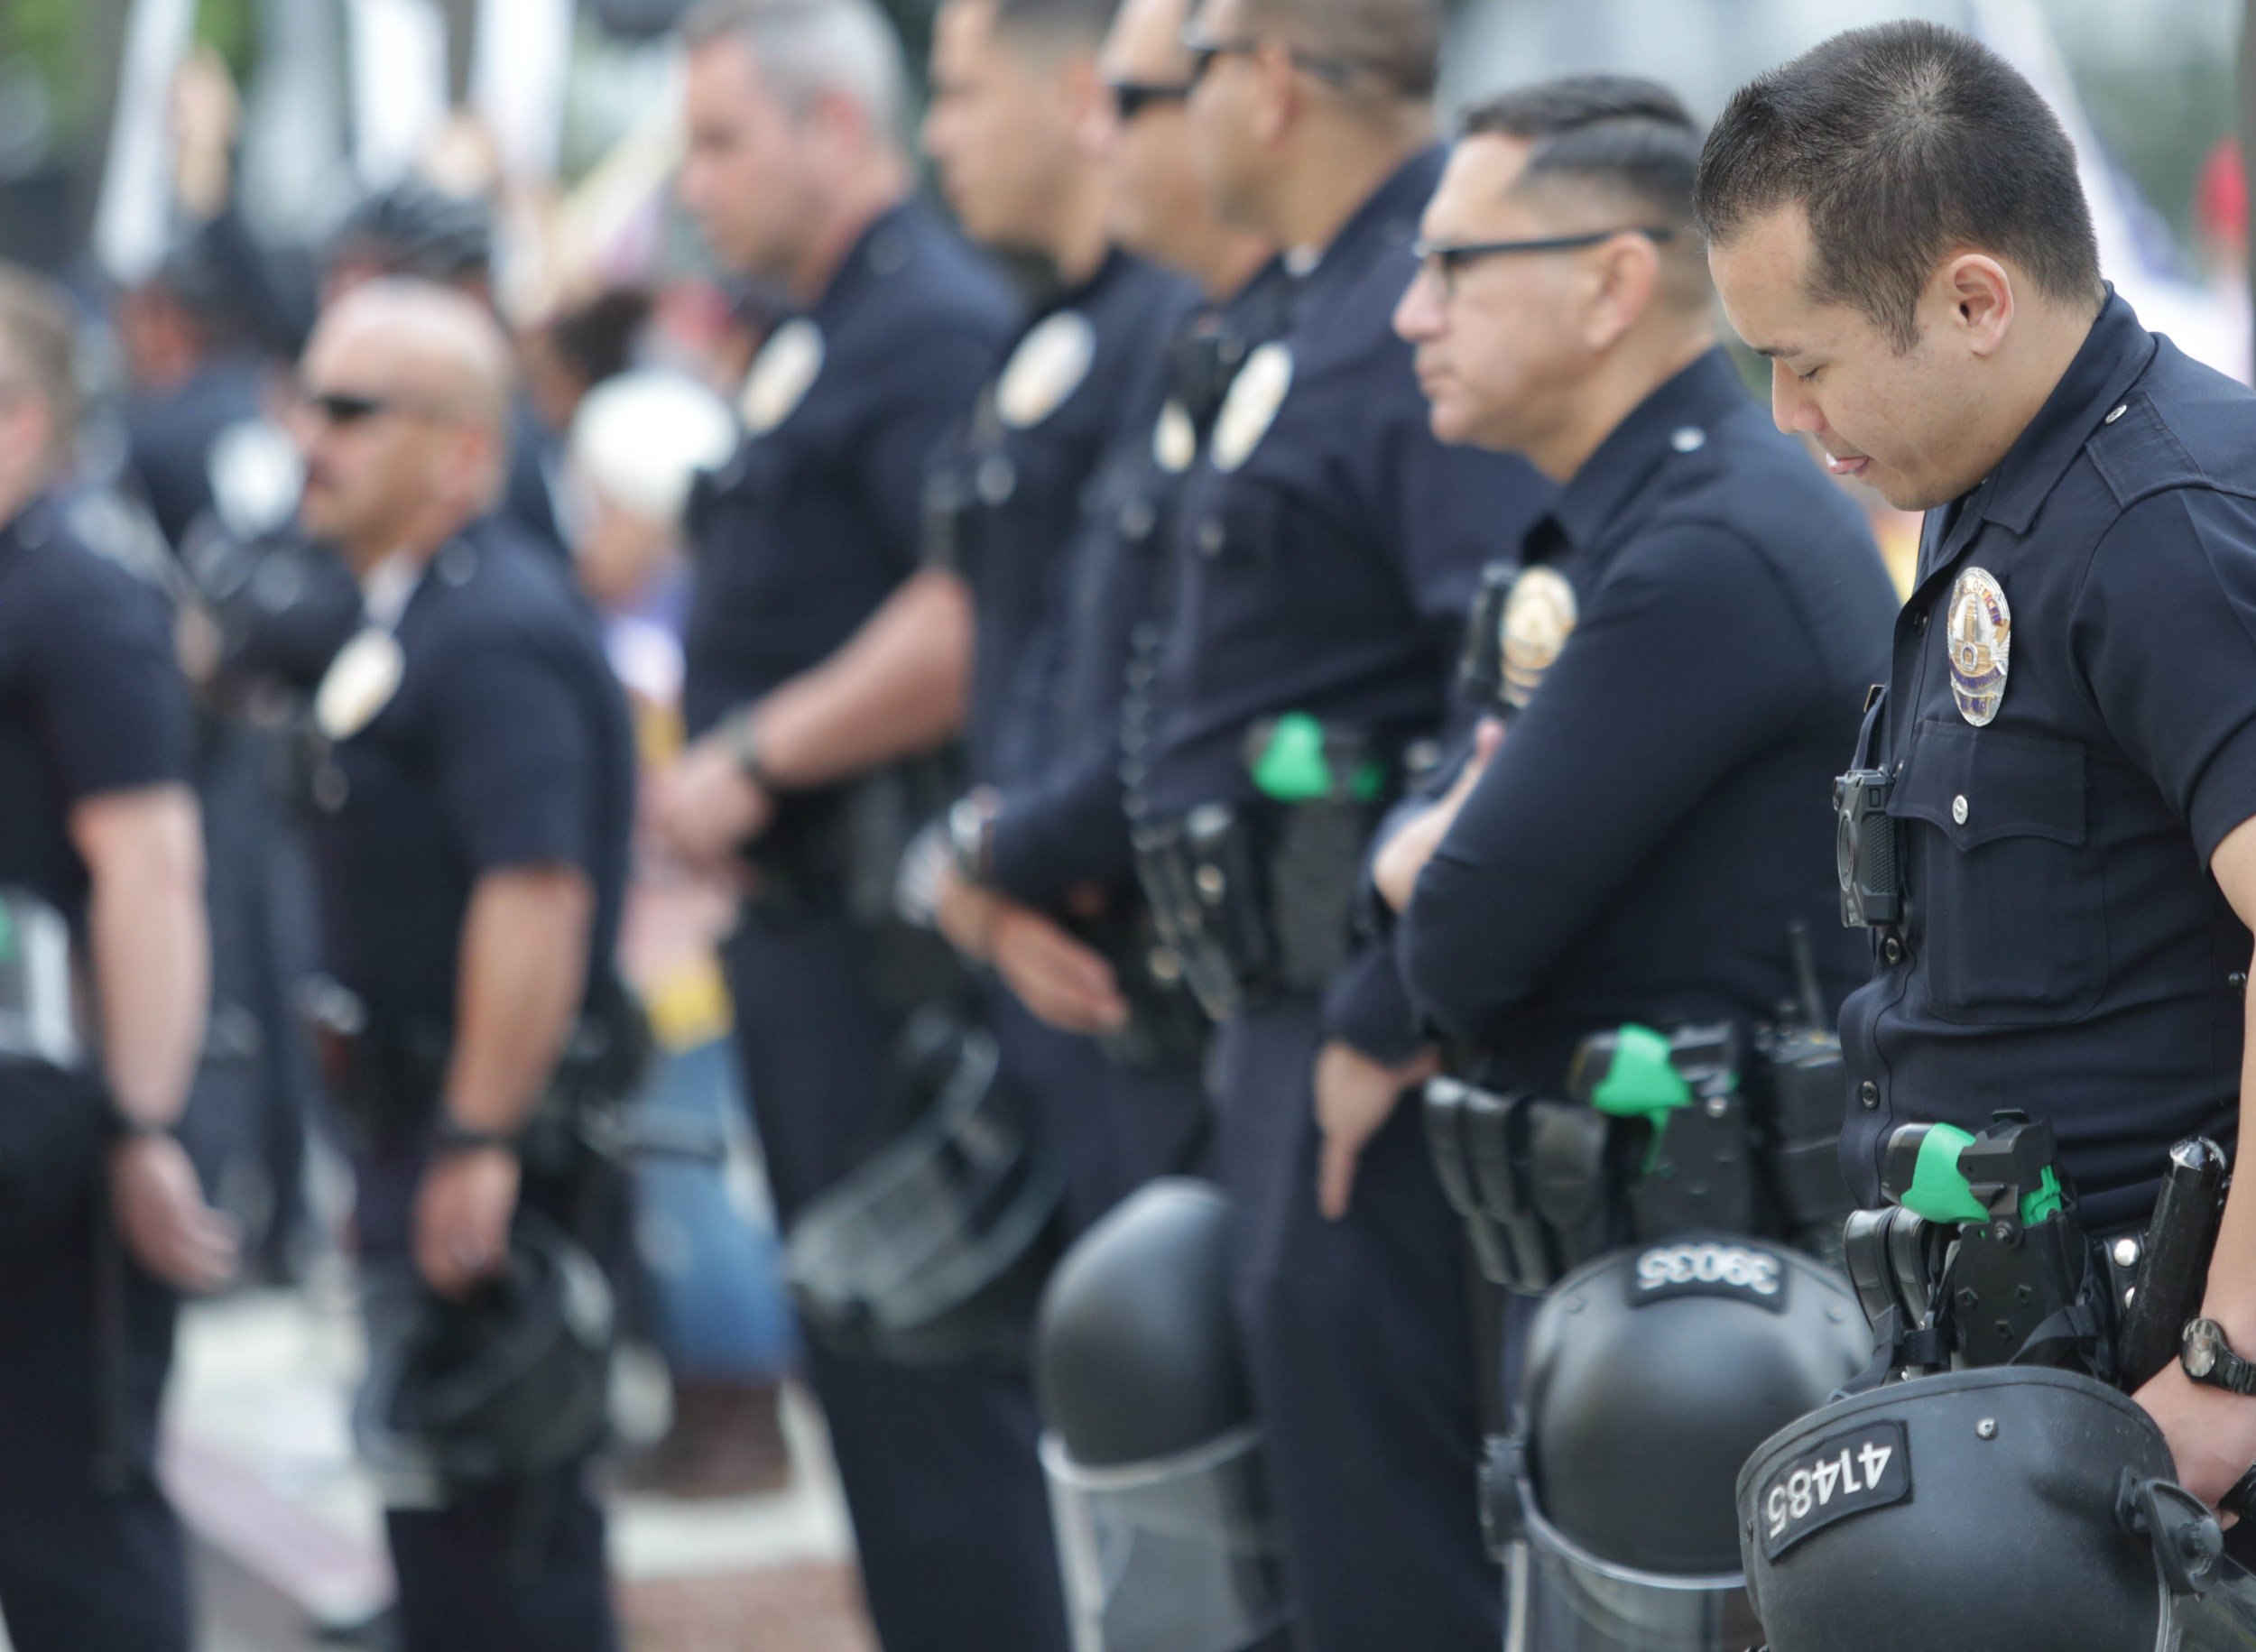  Police line up prepared for the worst seperating protesters and counter protesters on either side of them. Crowds gathered to support their respective belief at the March for Life in Downtown Los Angeles, California. The Demonstration took place on 